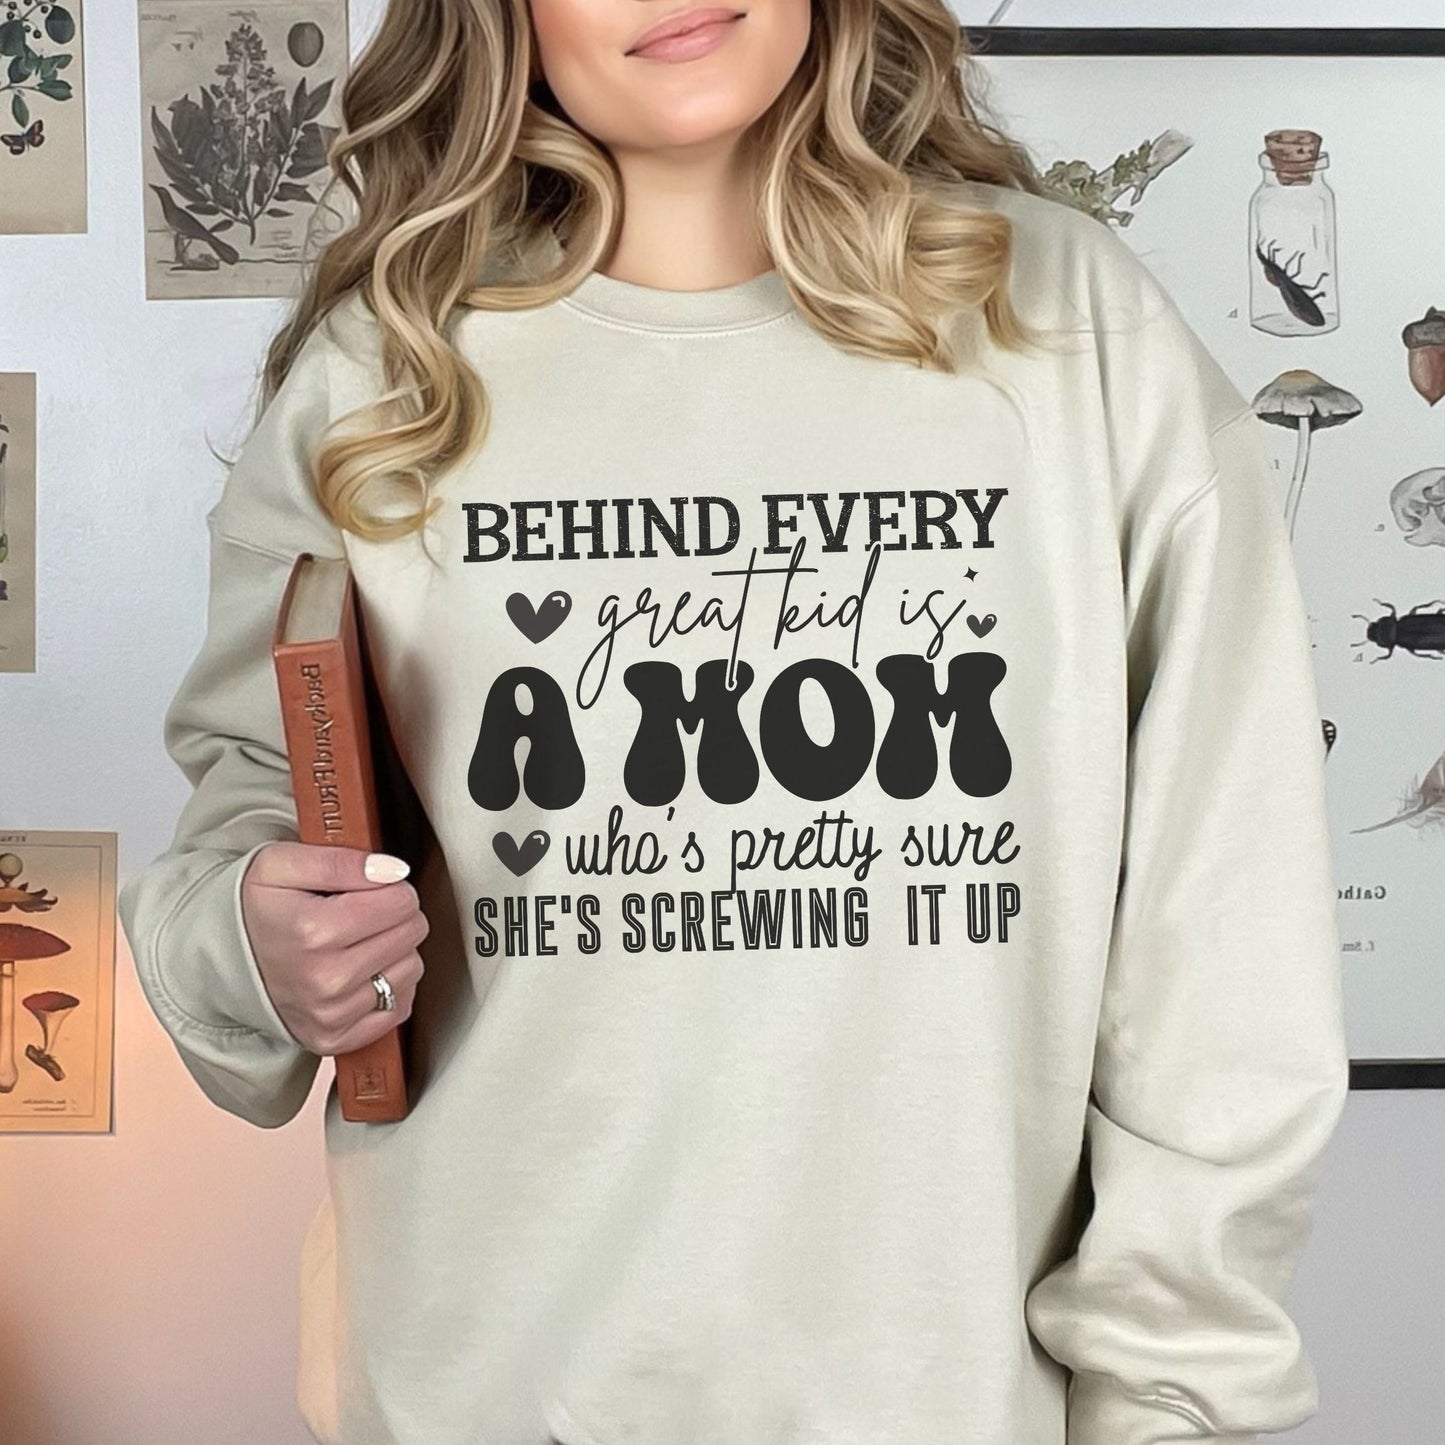 Sand Sweatshirt with Saying of Behind Every Great Kid is a Mom who's pretty sure She's Screwing It Up